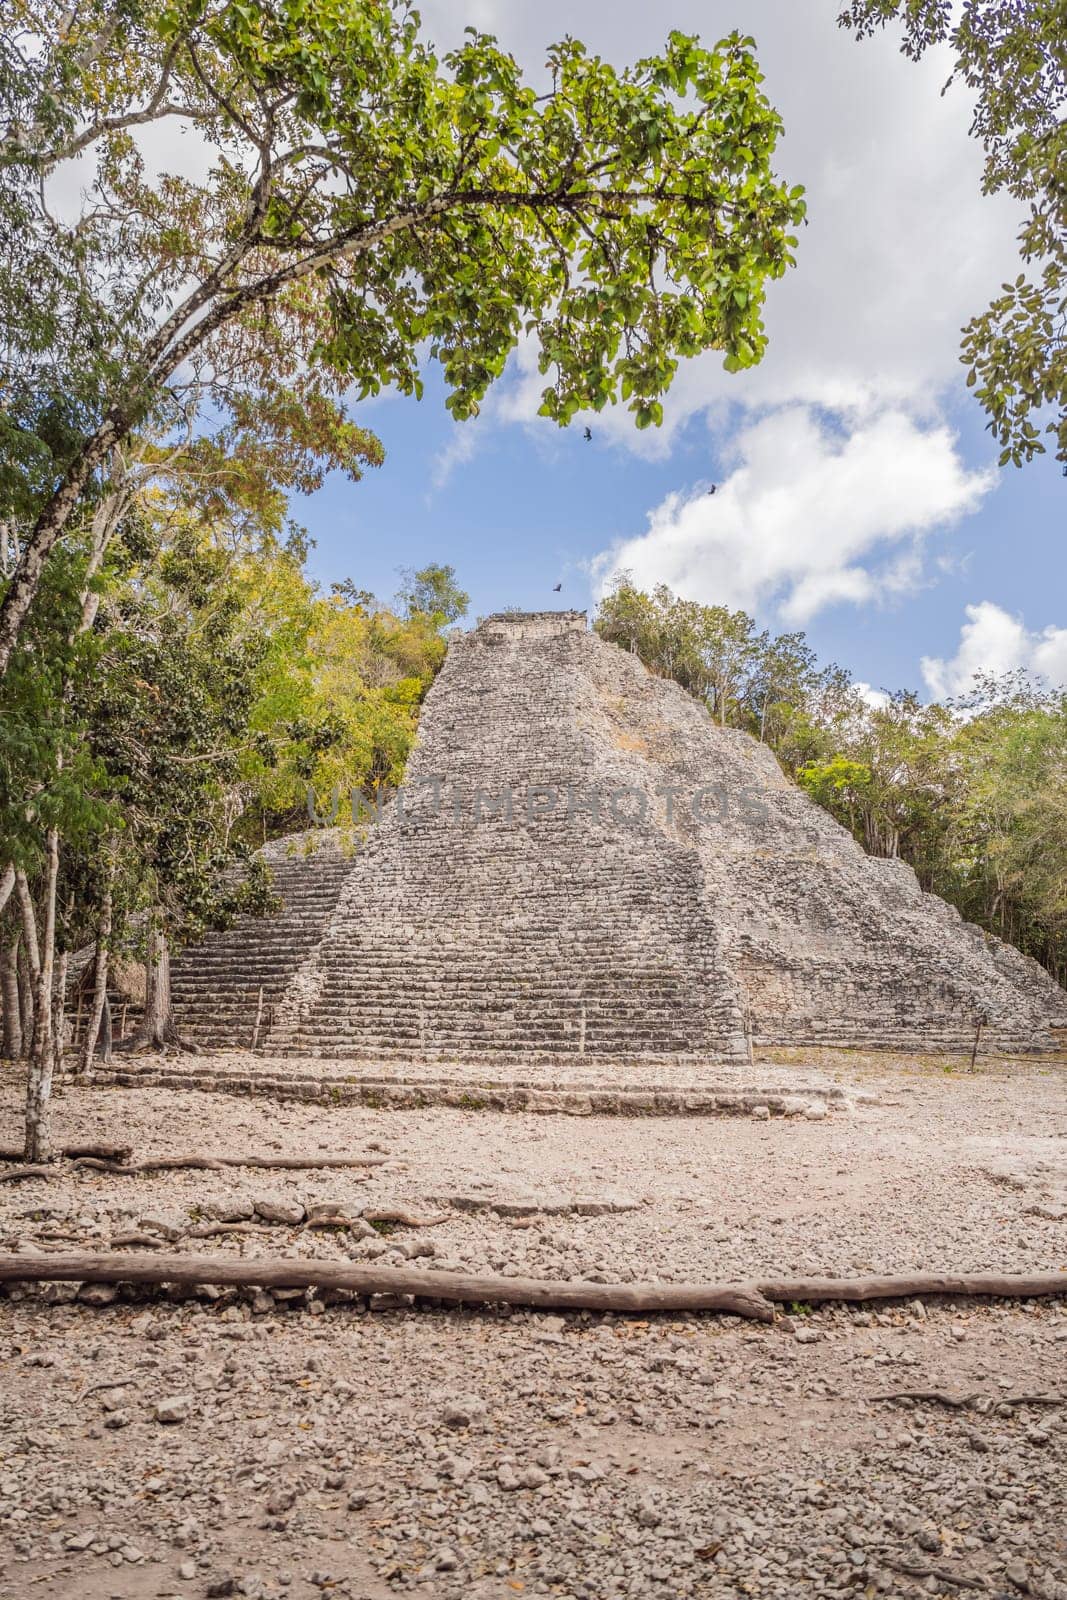 Coba, Mexico. Ancient mayan city in Mexico. Coba is an archaeological area and a famous landmark of Yucatan Peninsula. Cloudy sky over a pyramid in Mexico.